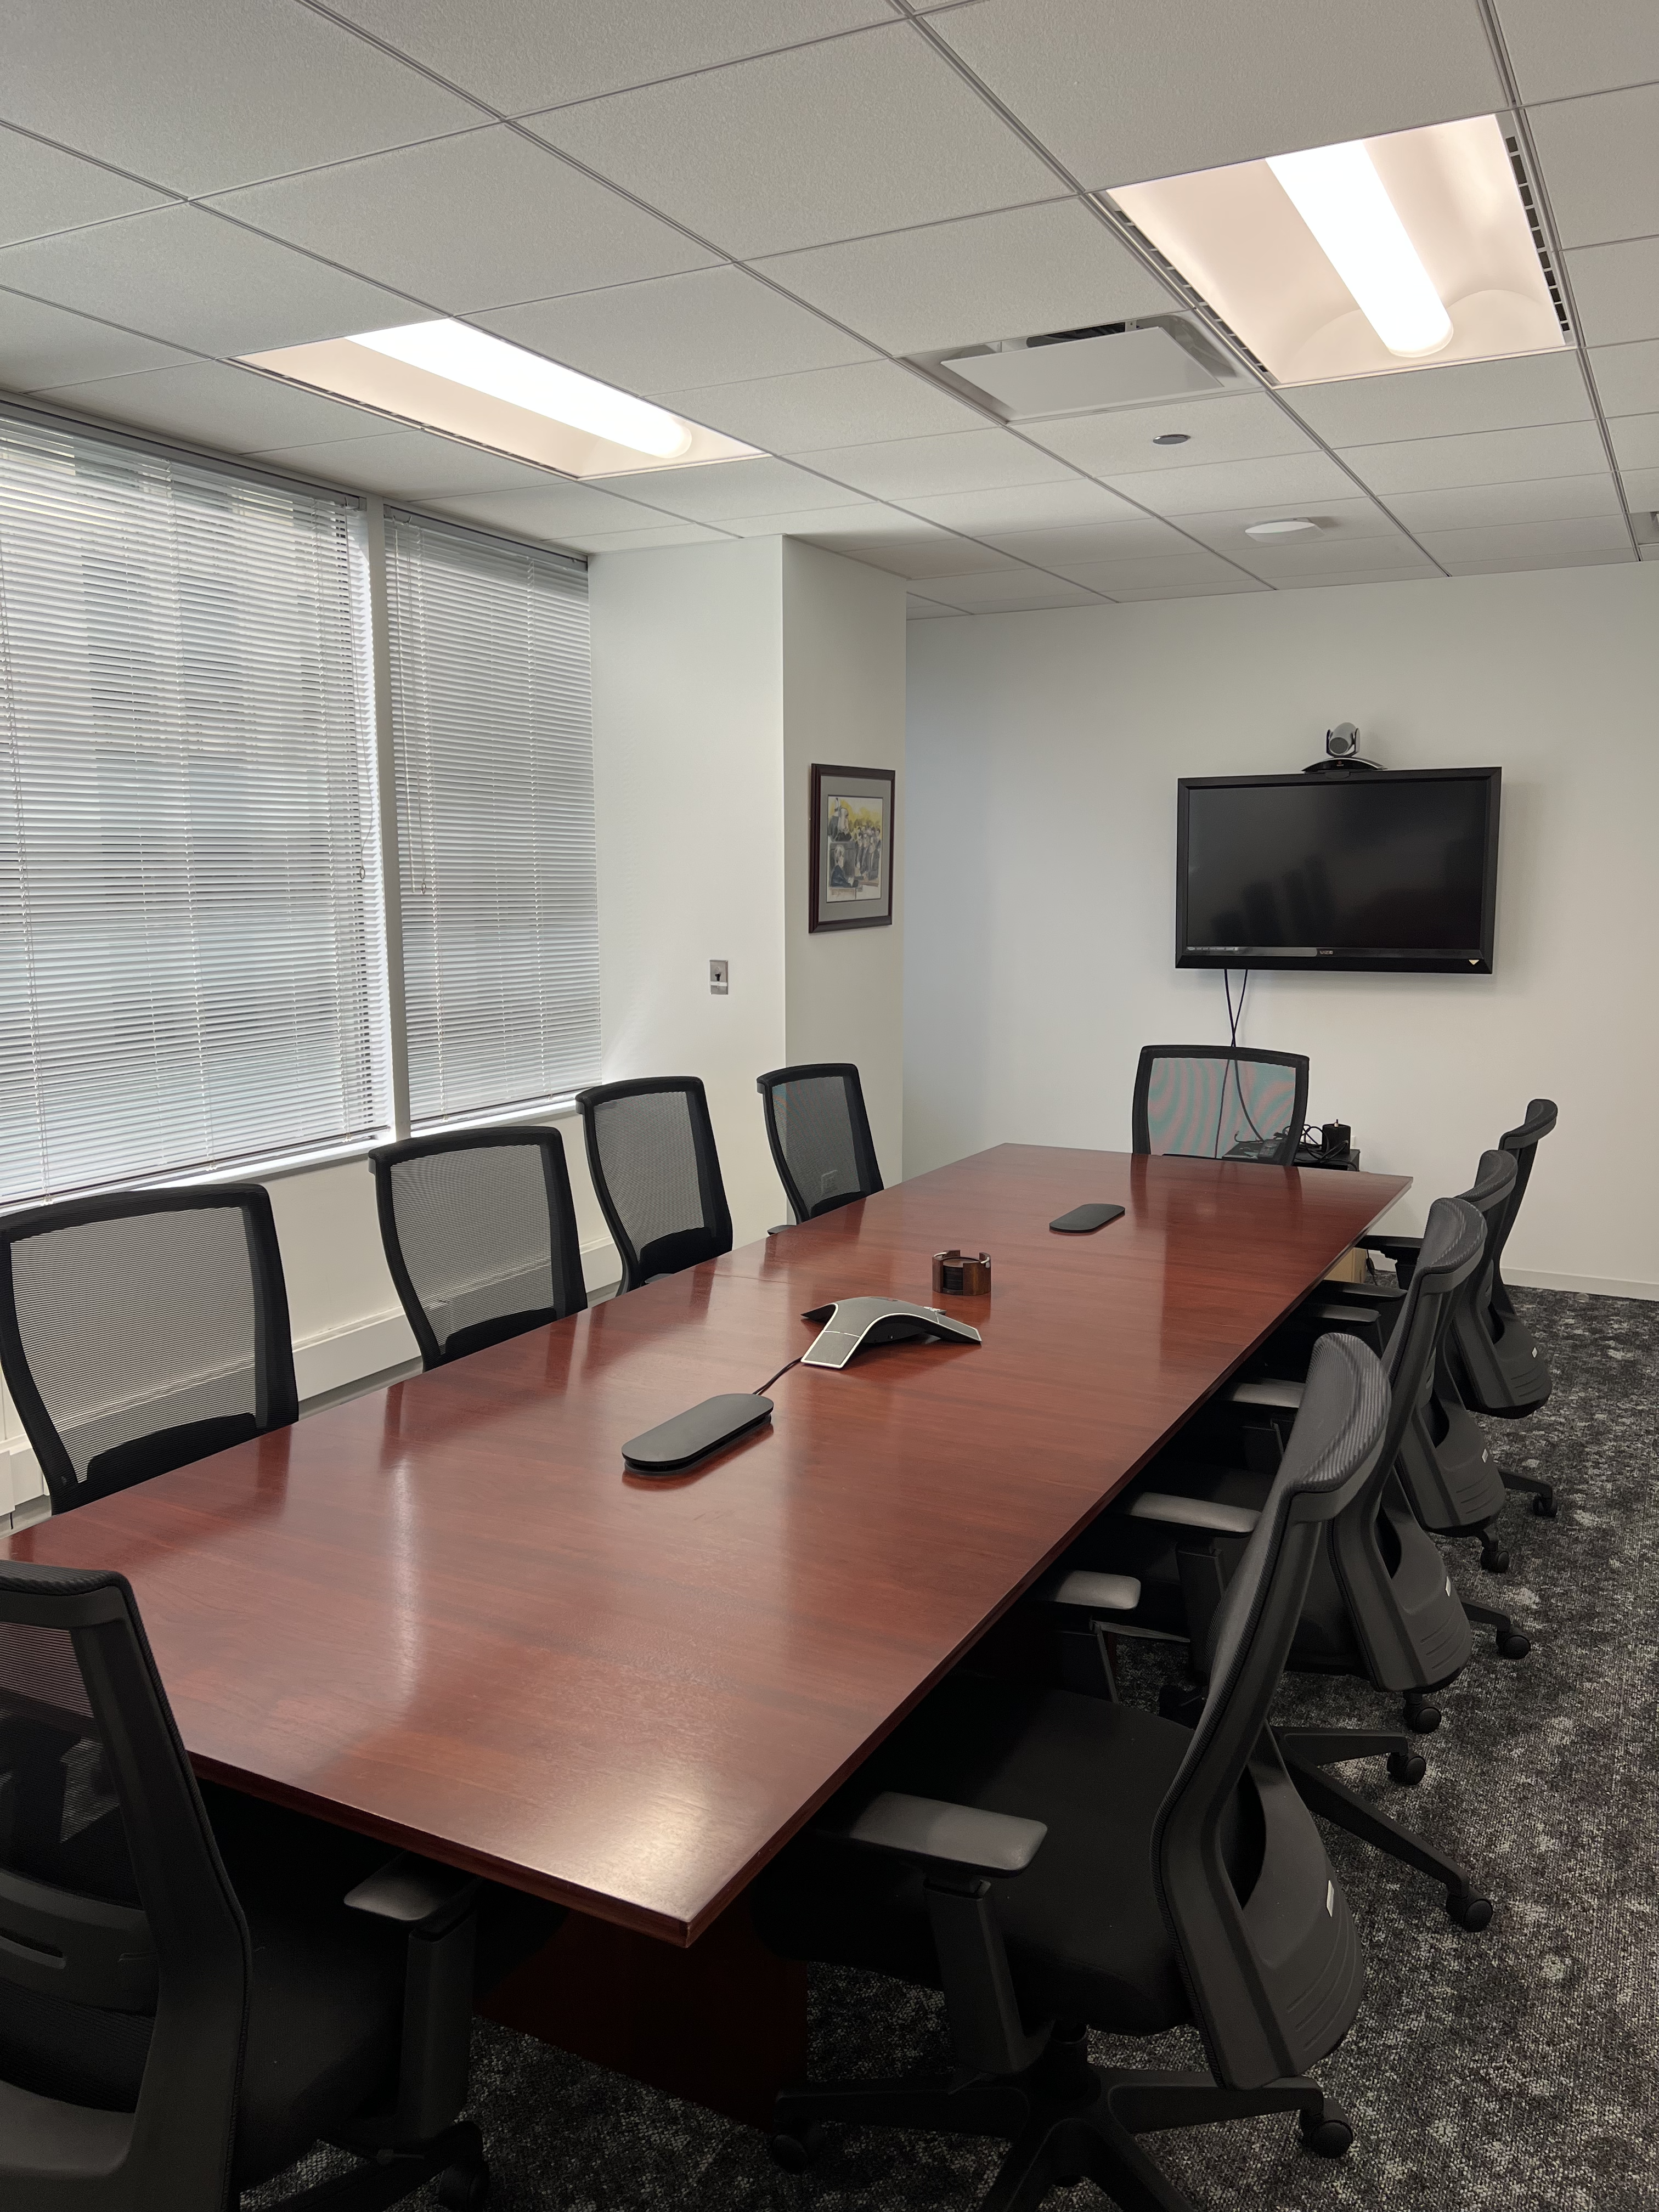 Video conferencing available at Urlaub Bowen & Associates in Chicago, IL. for depositions, interviews, meetings, and more.